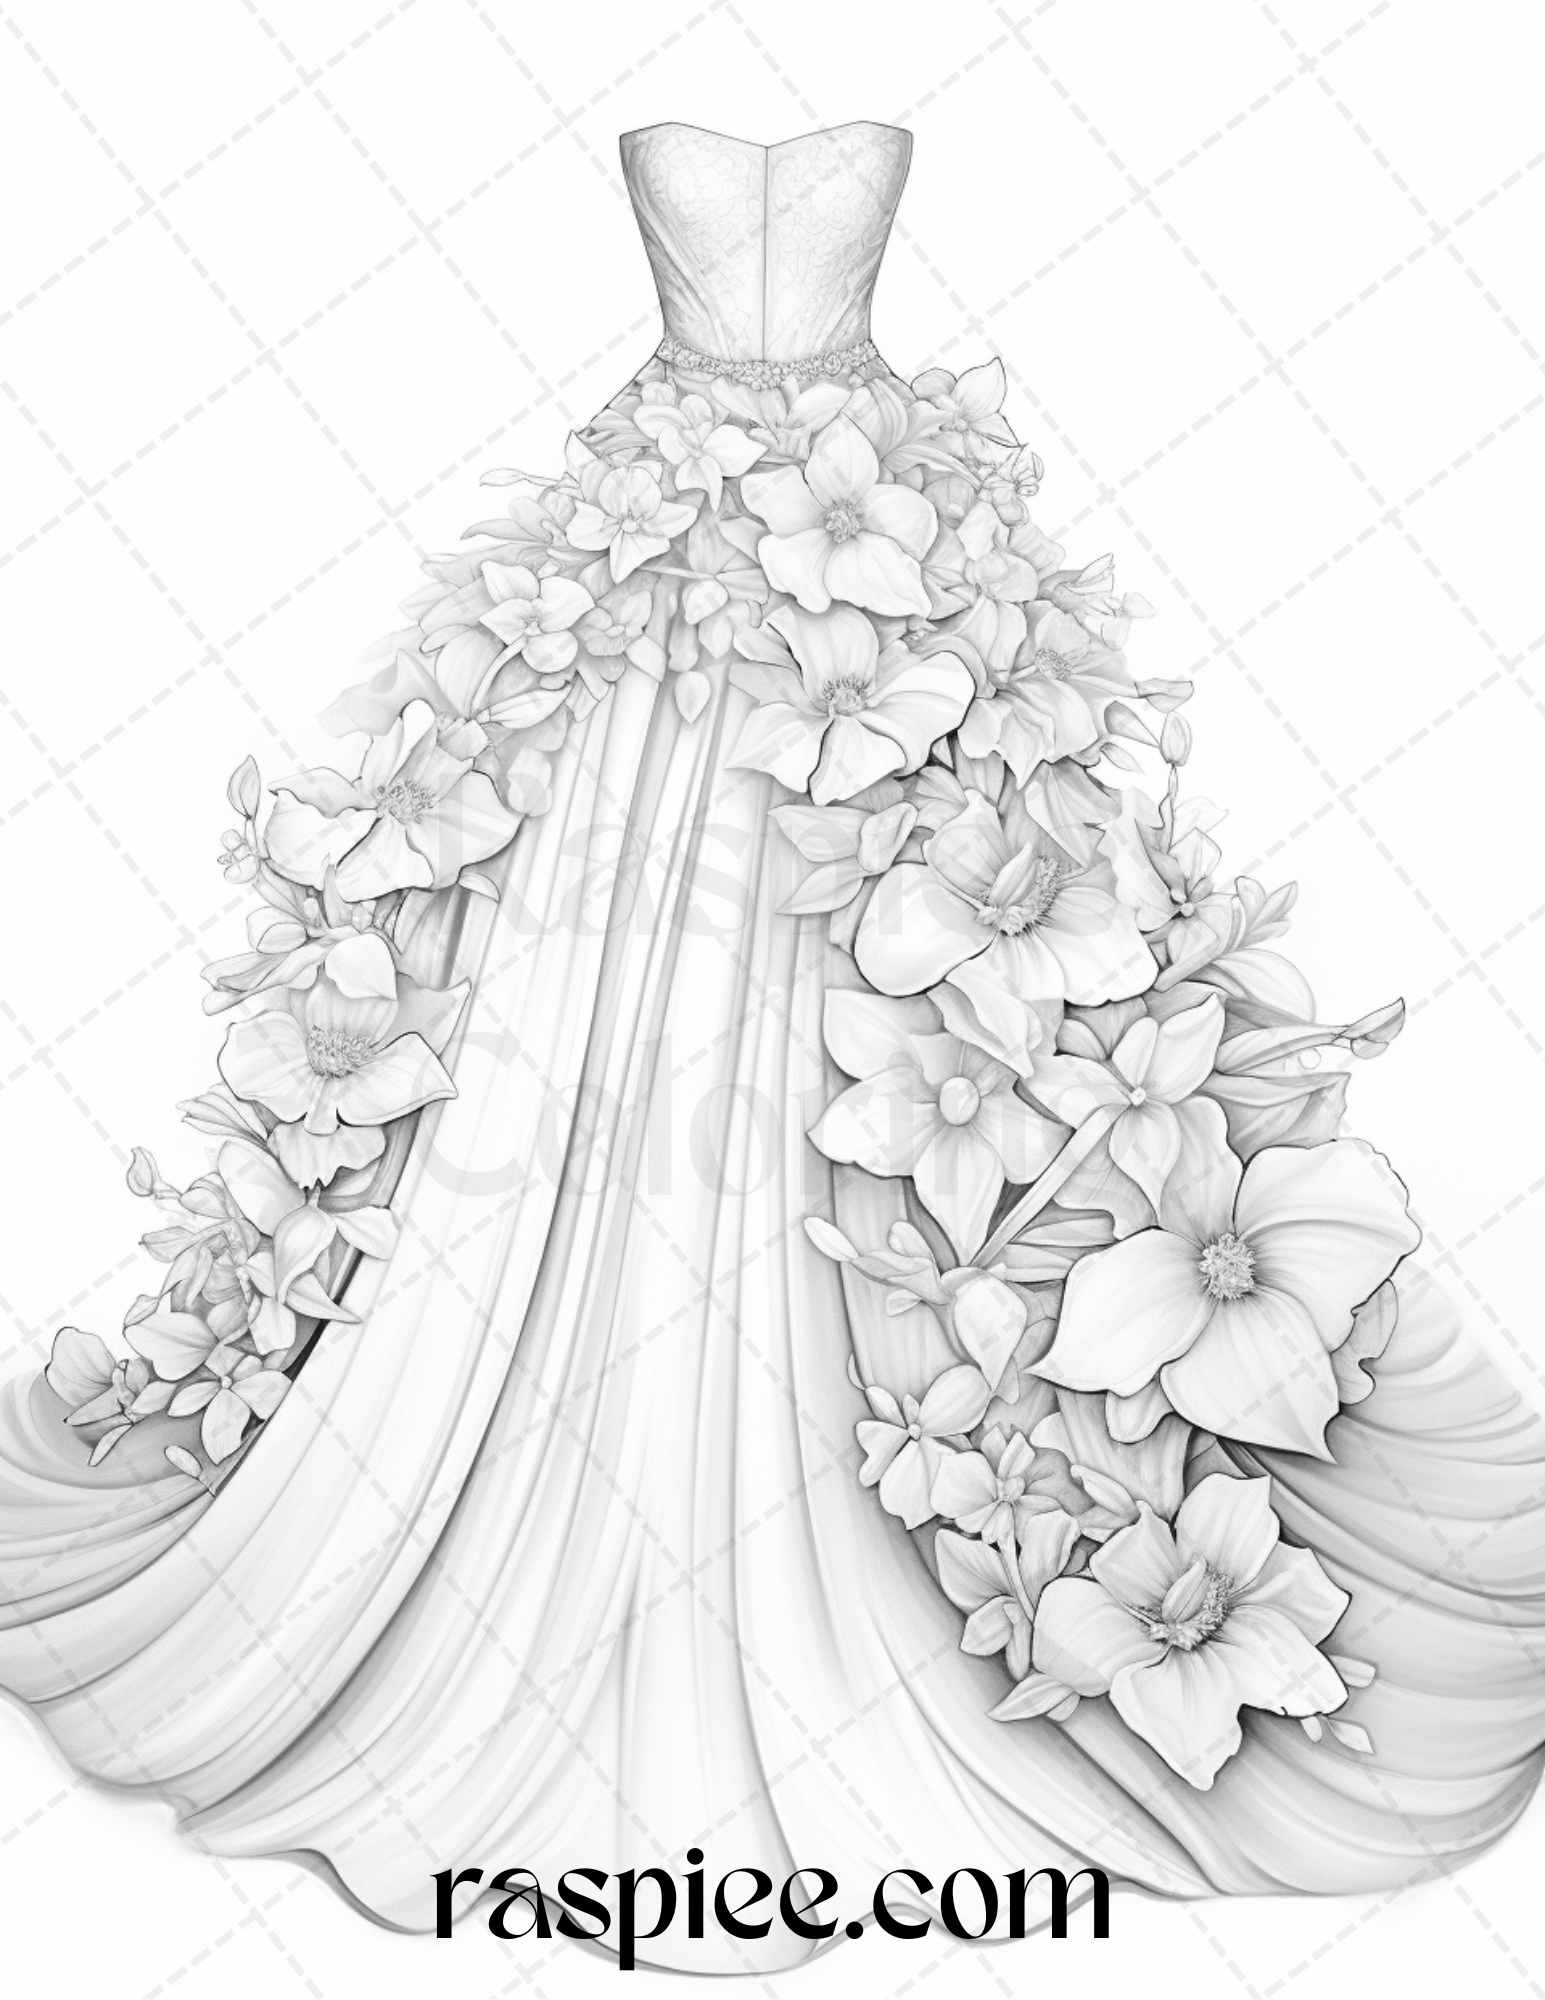 Floral wedding dress coloring page, Elegant grayscale adult coloring printable, Intricate floral gown illustration, Wedding fashion coloring pages, Printable coloring page for adults